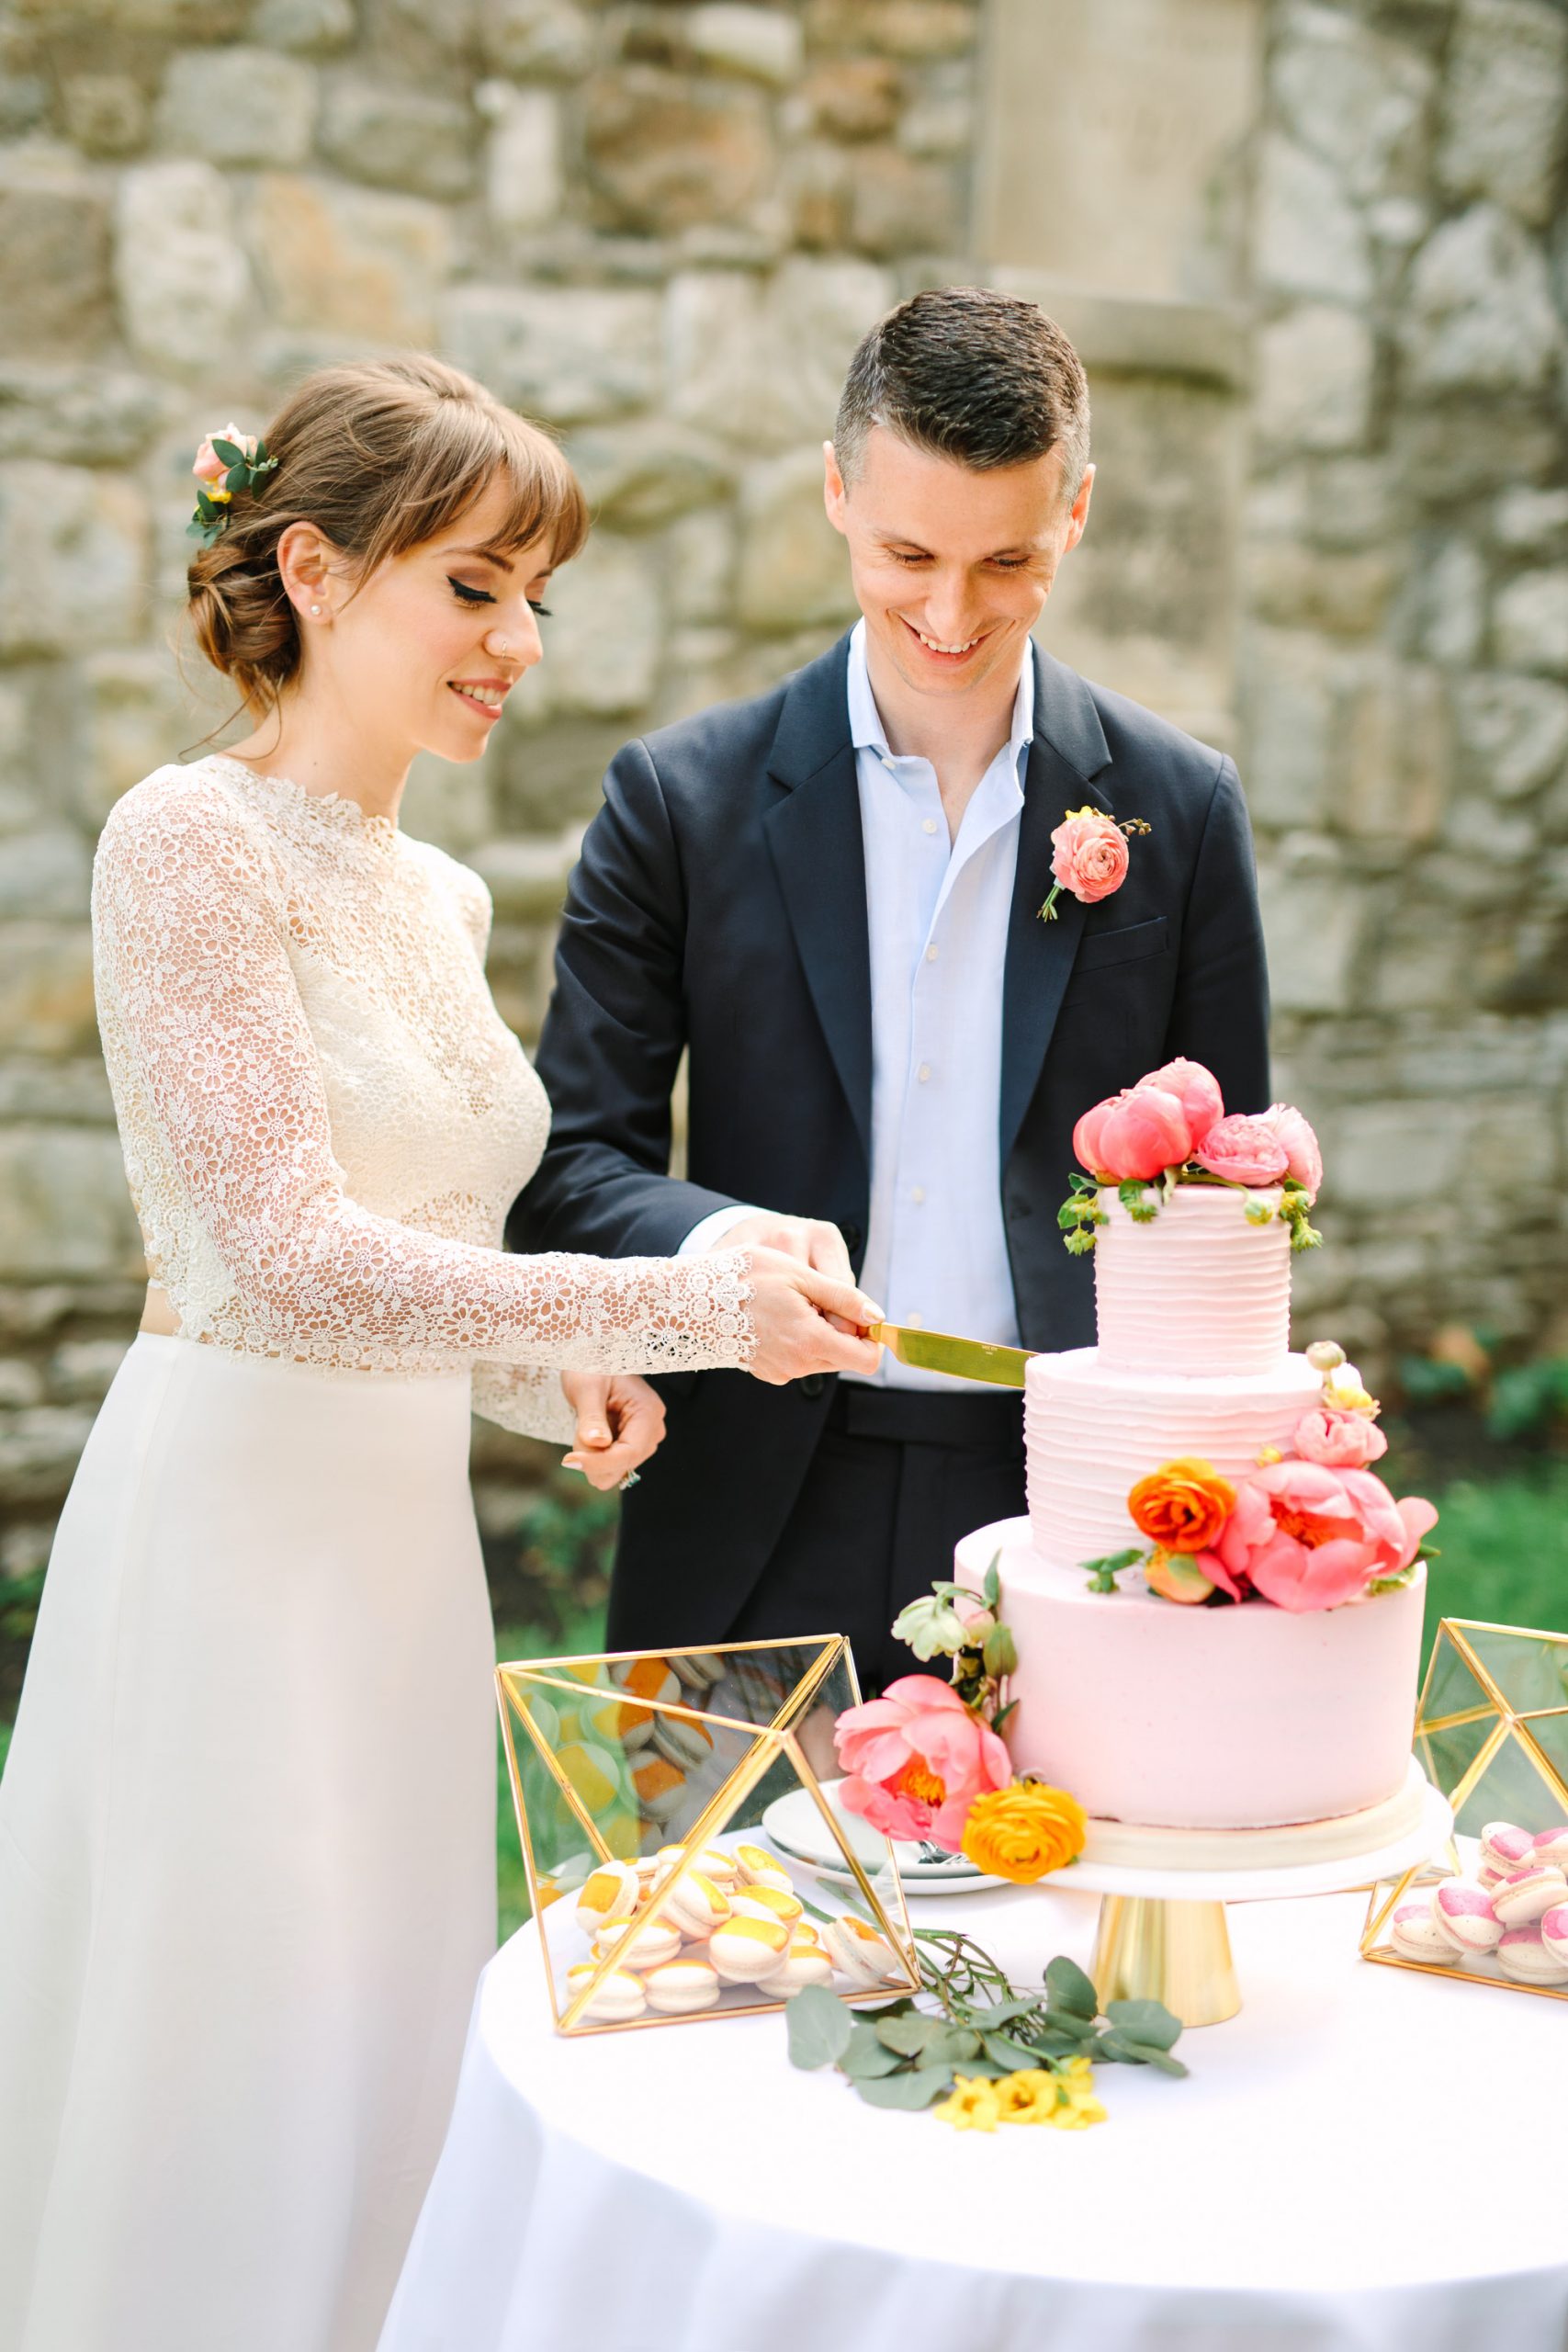 Bride and groom cutting wedding cake by Mary Costa Photography